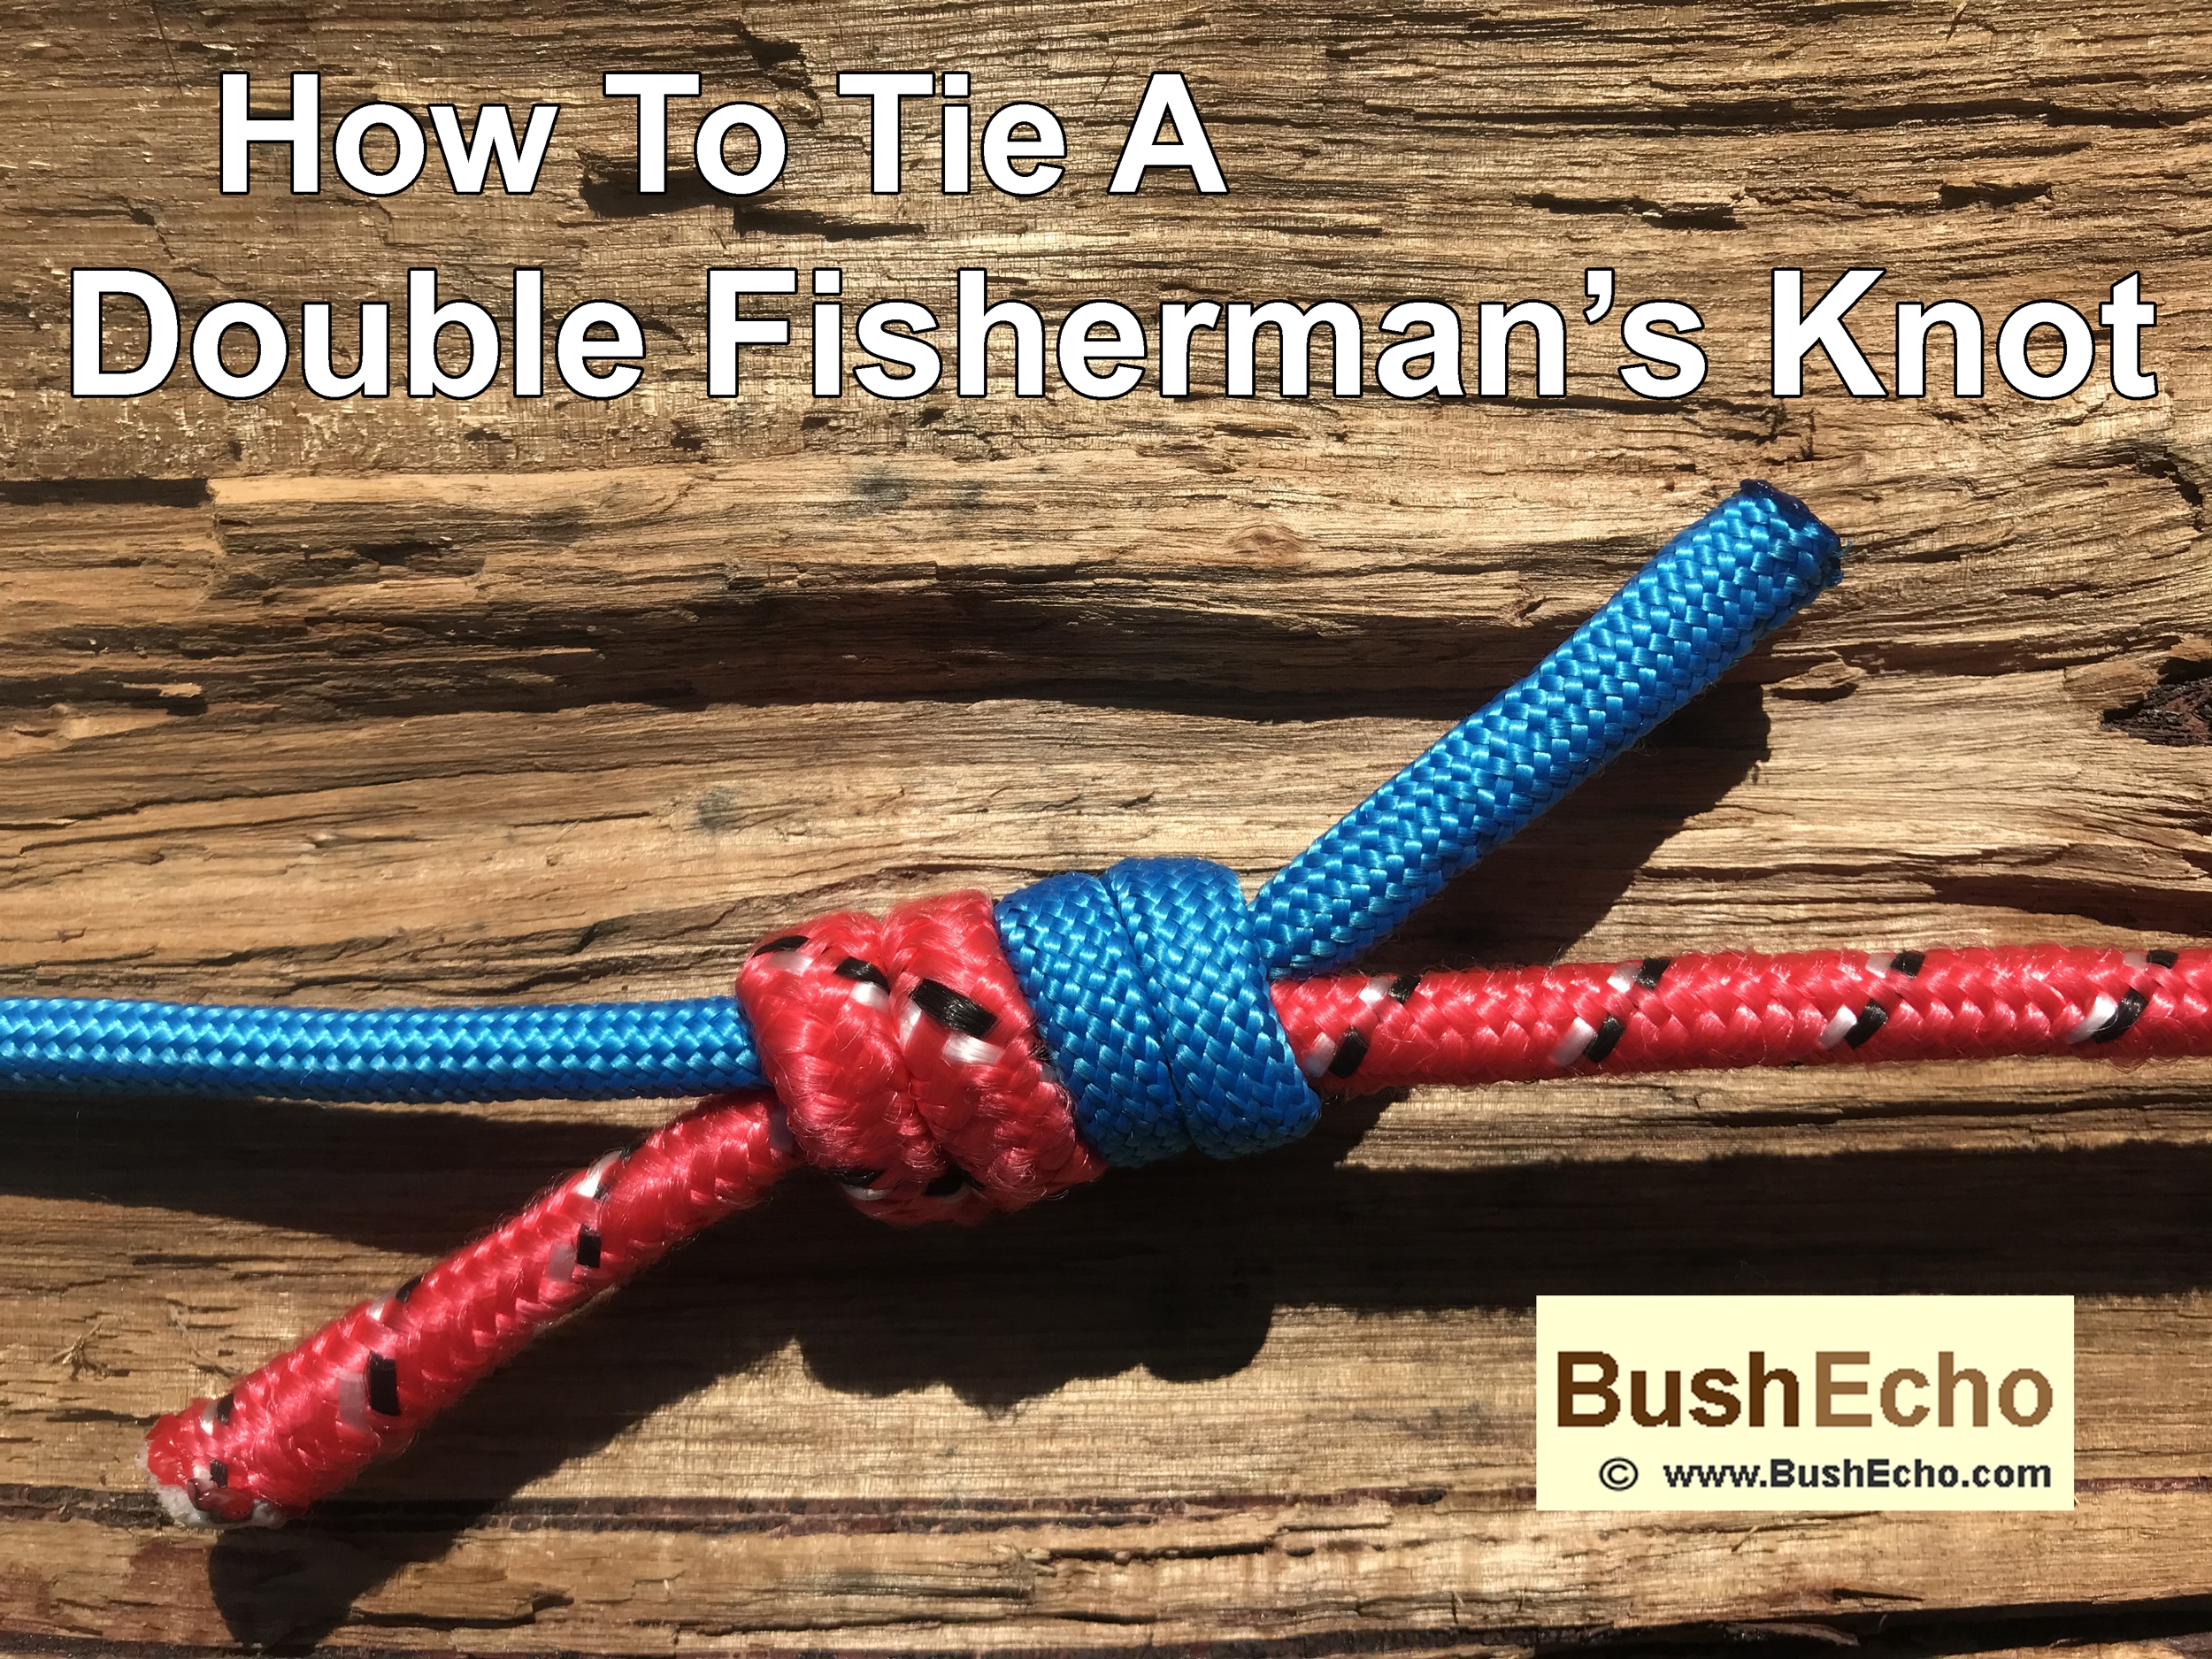 How To Tie A Double Fisherman’s Knot for Bushcraft